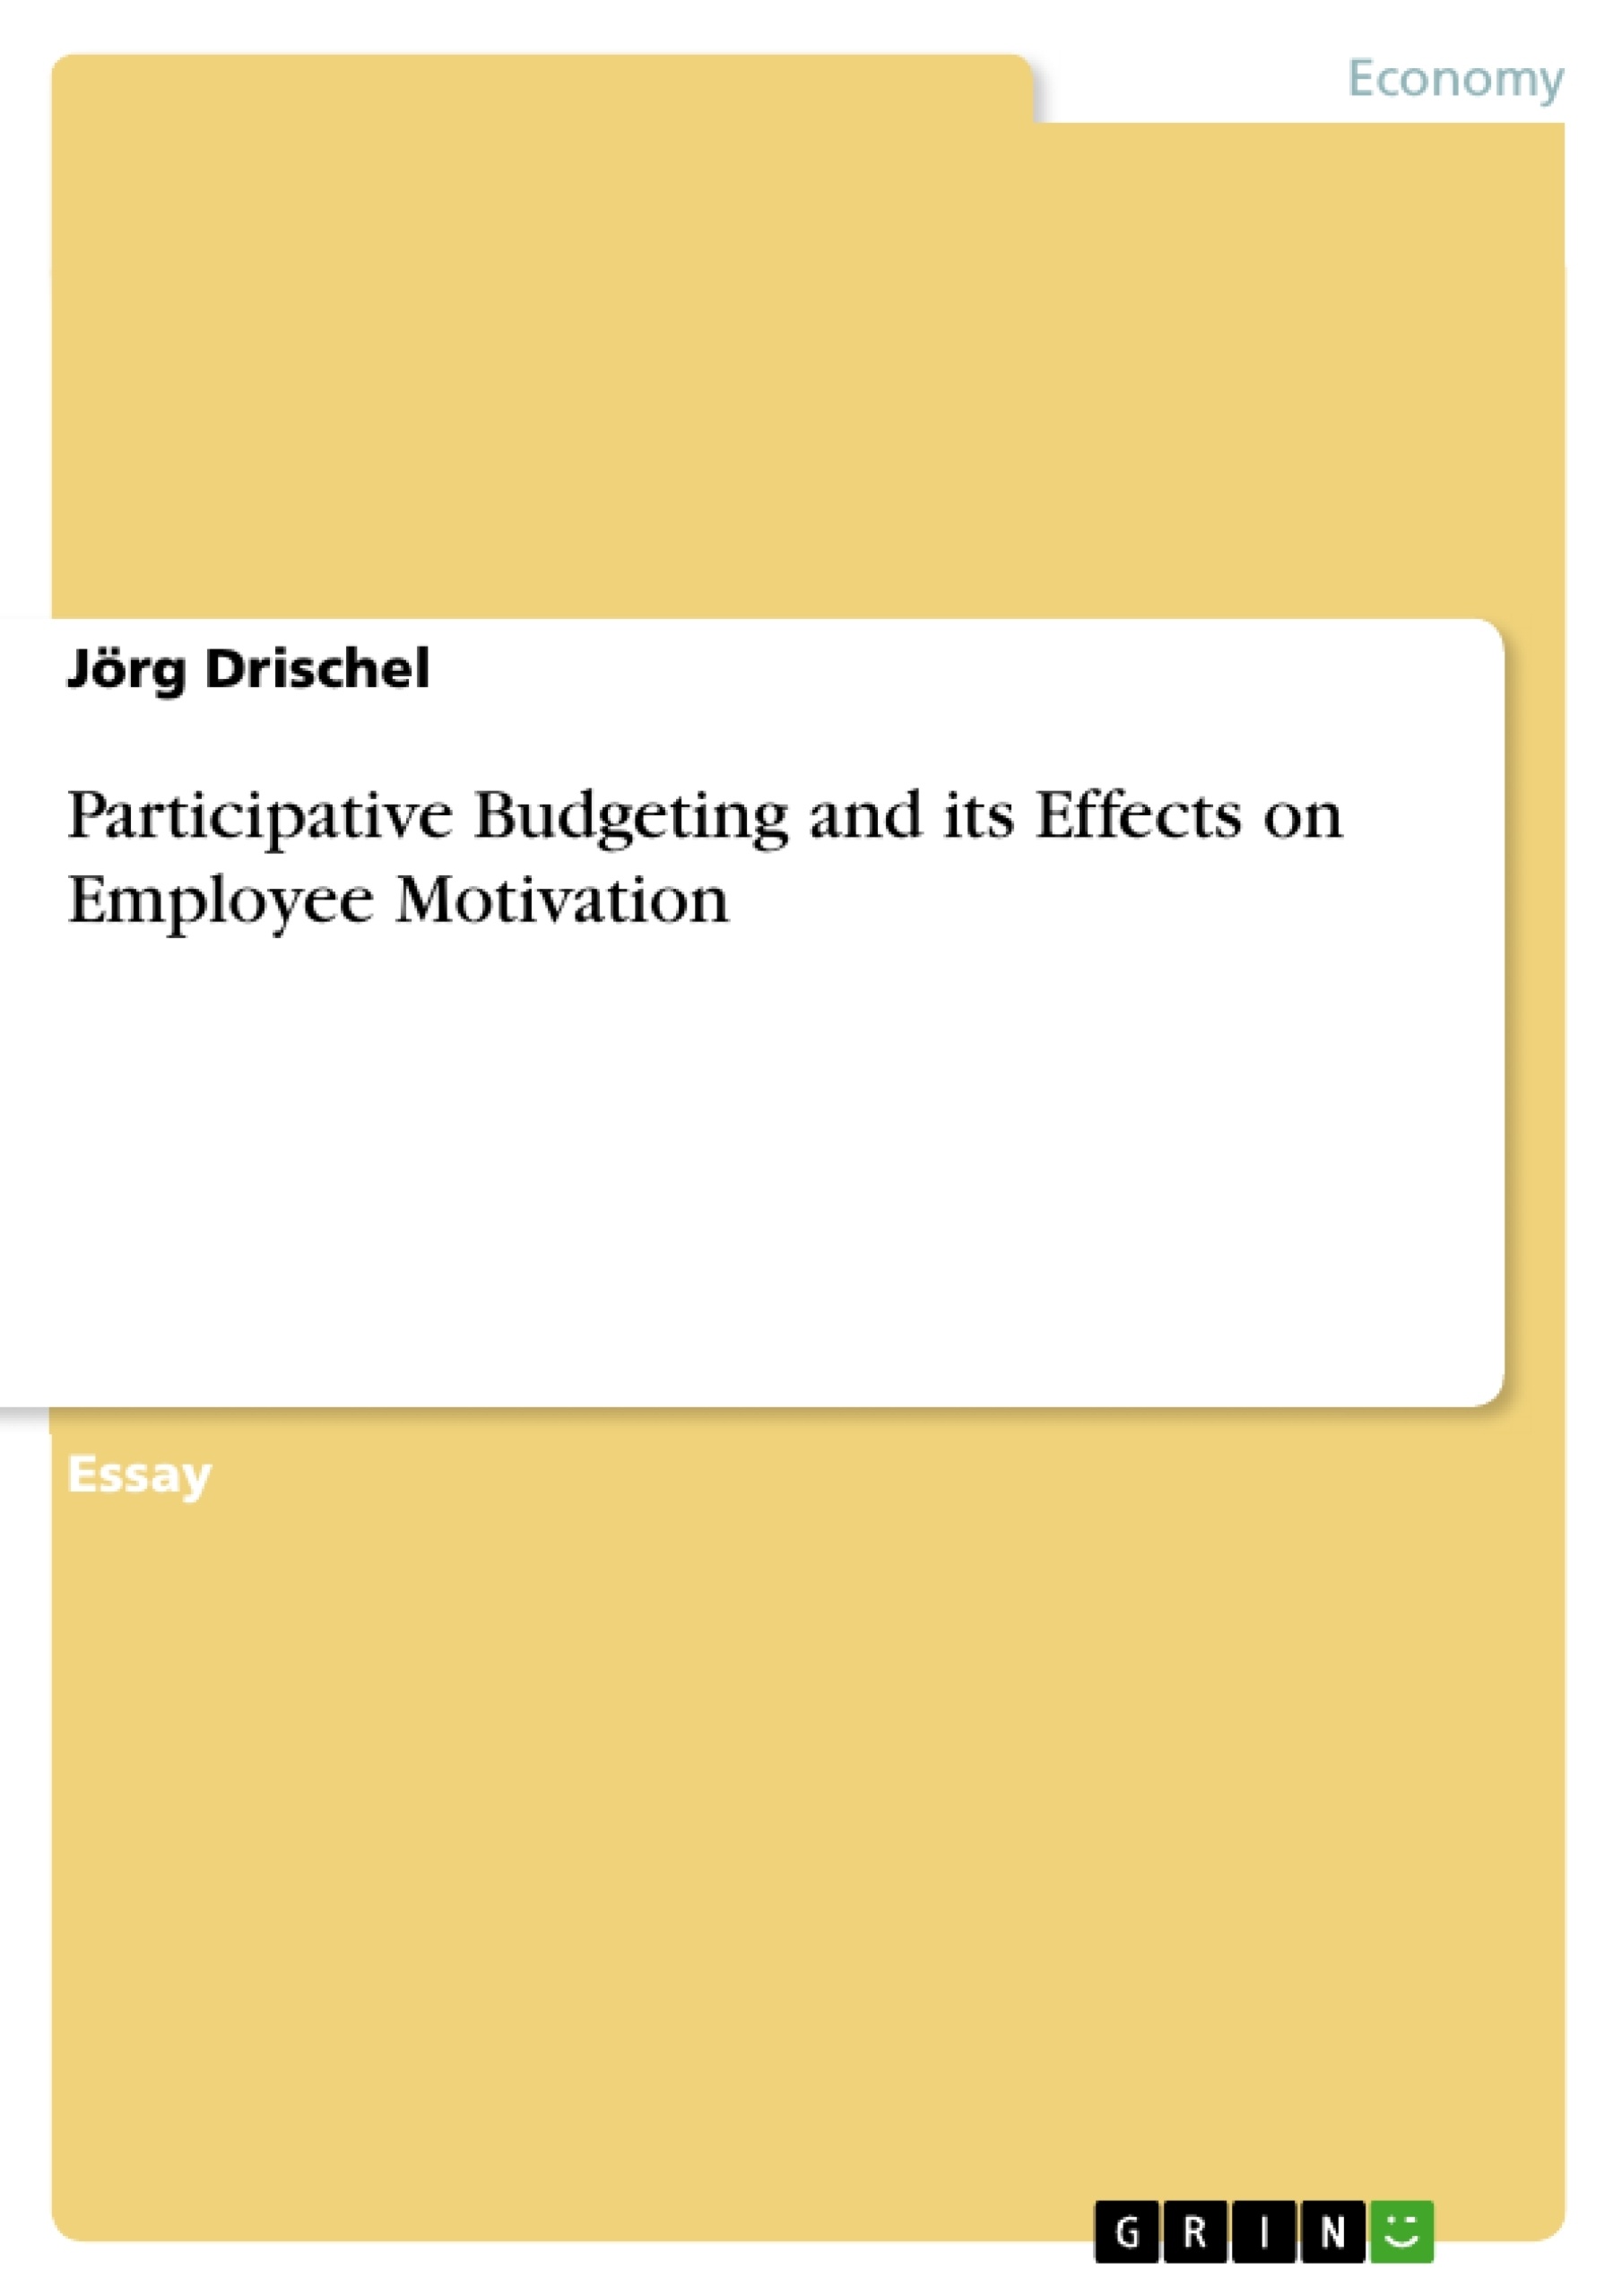 Title: Participative Budgeting and its Effects on Employee Motivation